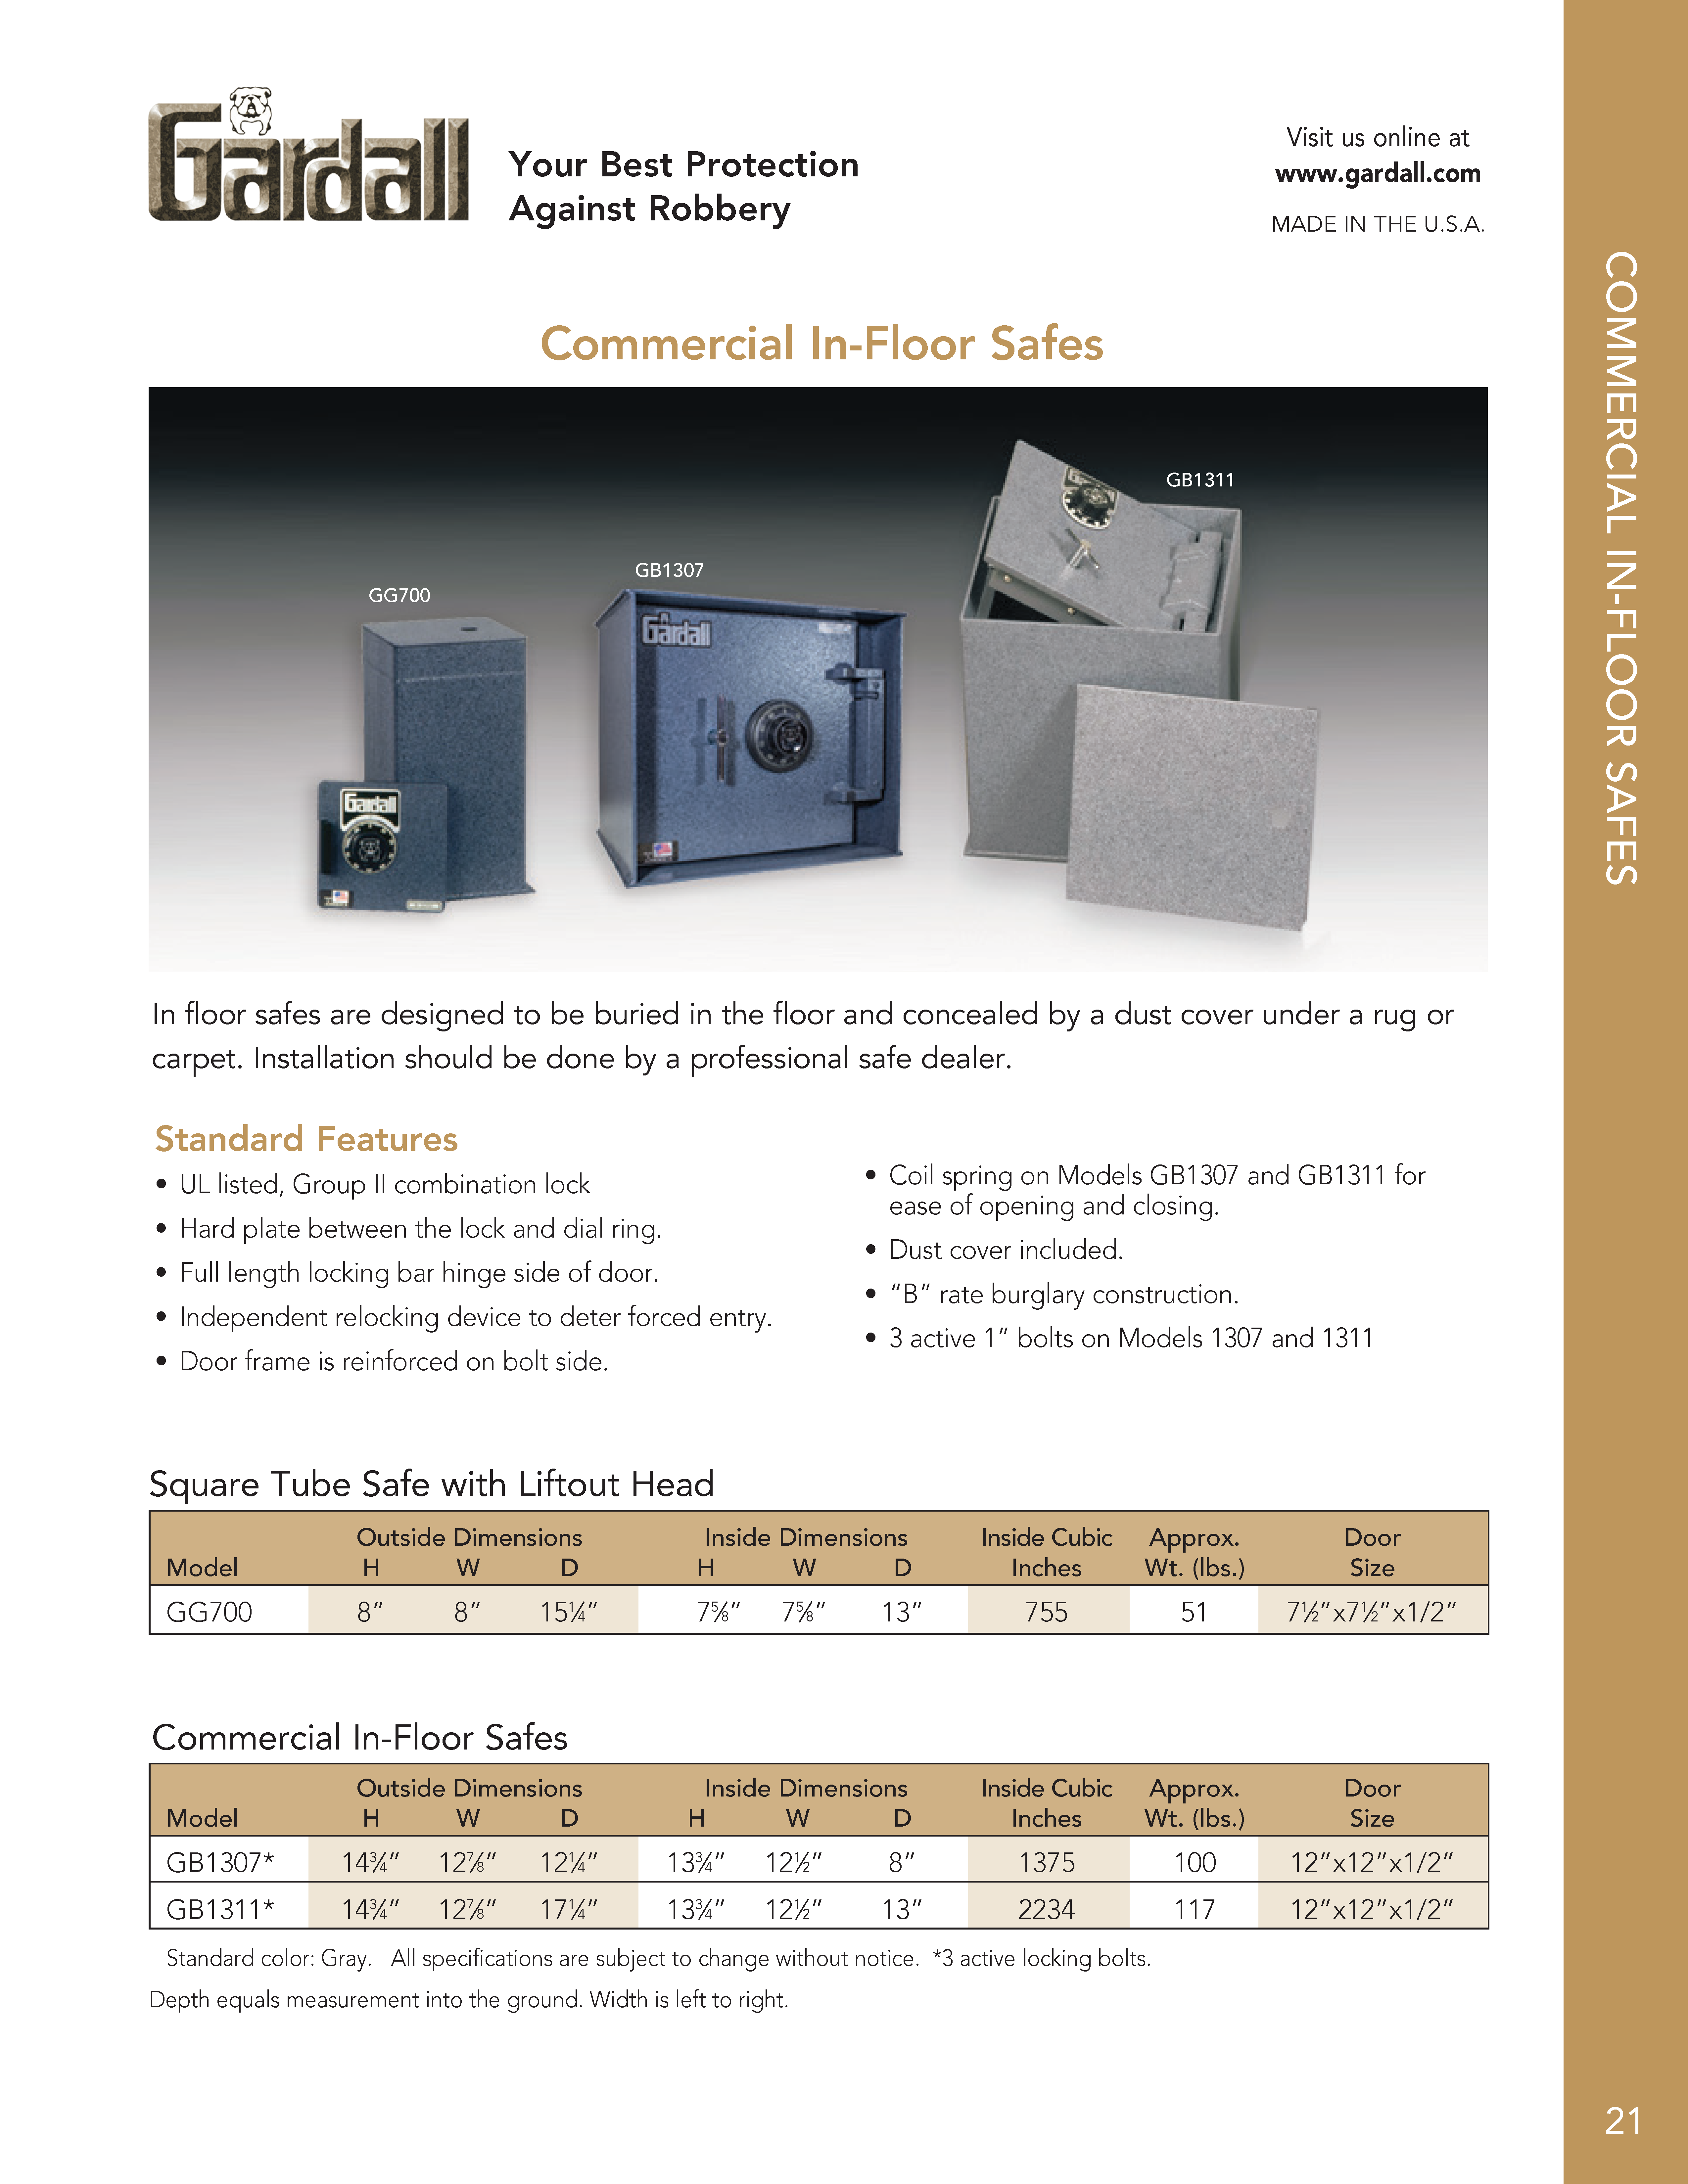 Image of Floor Safe Catalog Page